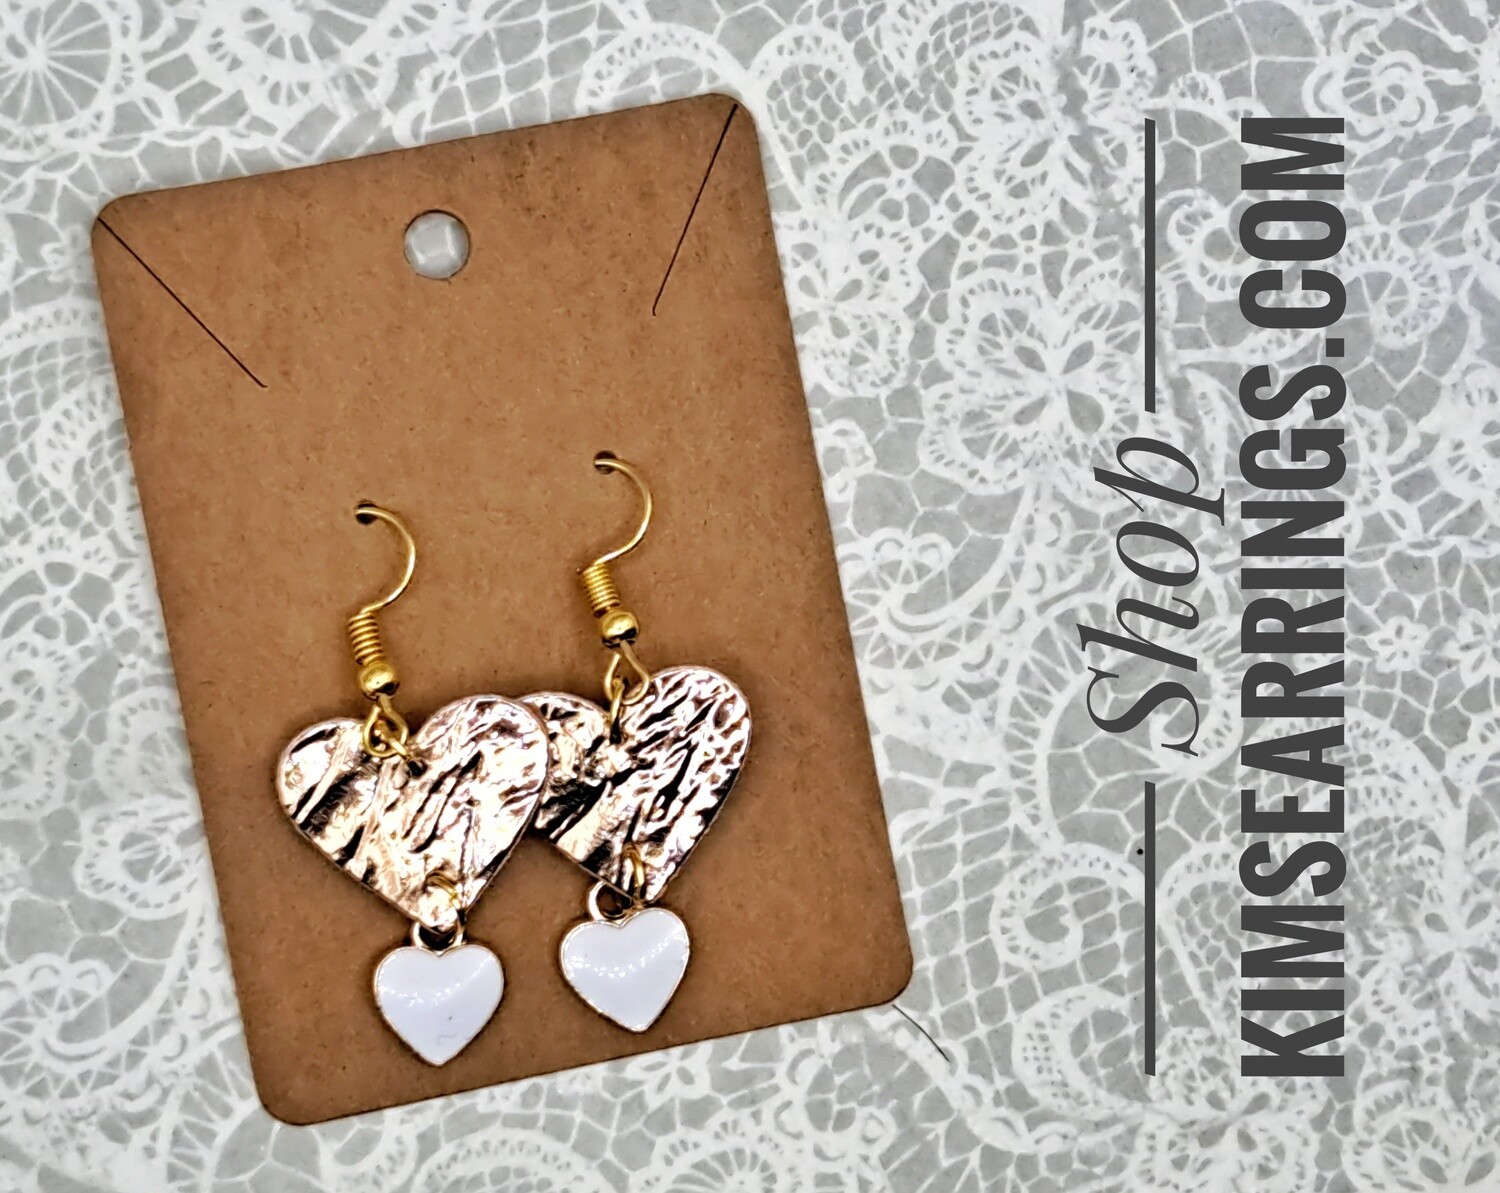 Handmade Rose Gold Foil Faux Leather with White Cut Heart Charms Earrings